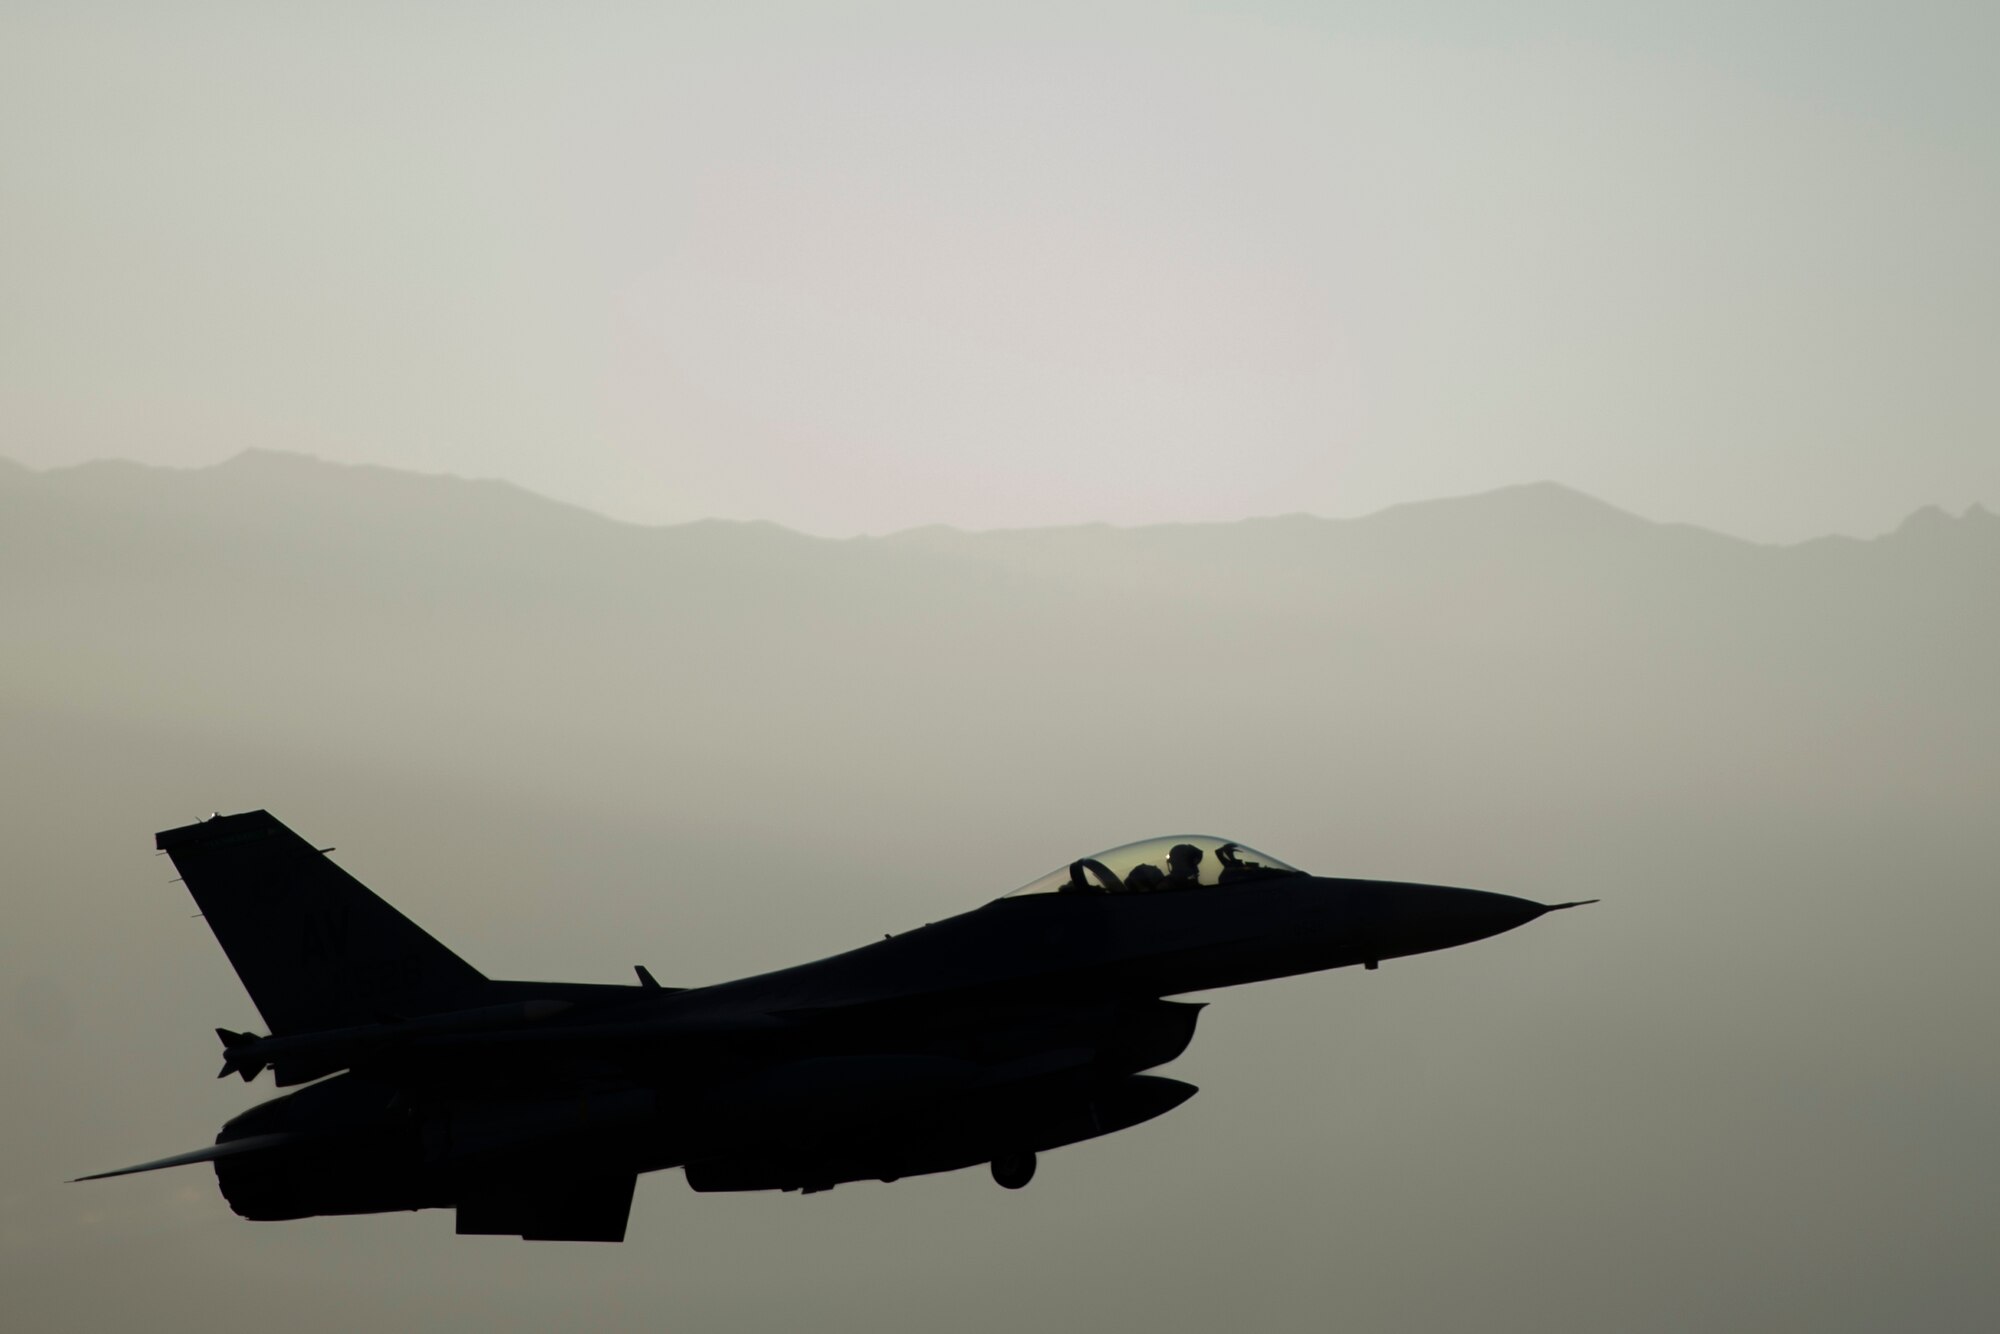 Lt. Col. Michael Meyer, 421st Expeditionary Fighter Squadron commander, deployed from Hill Air Force Base, Utah, departs on a sortie from Bagram Airfield, Afghanistan, Oct. 30, 2015. Airmen assigned to the 421st Fighter Squadron, known as the “Black Widows,” from Hill Air Force Base, Utah, arrived here Oct. 28, 2015 in support of Operation Freedom’s Sentinel and NATO’s Resolute Support mission. (U.S. Air Force photo/Tech. Sgt. Robert Cloys/RELEASED)